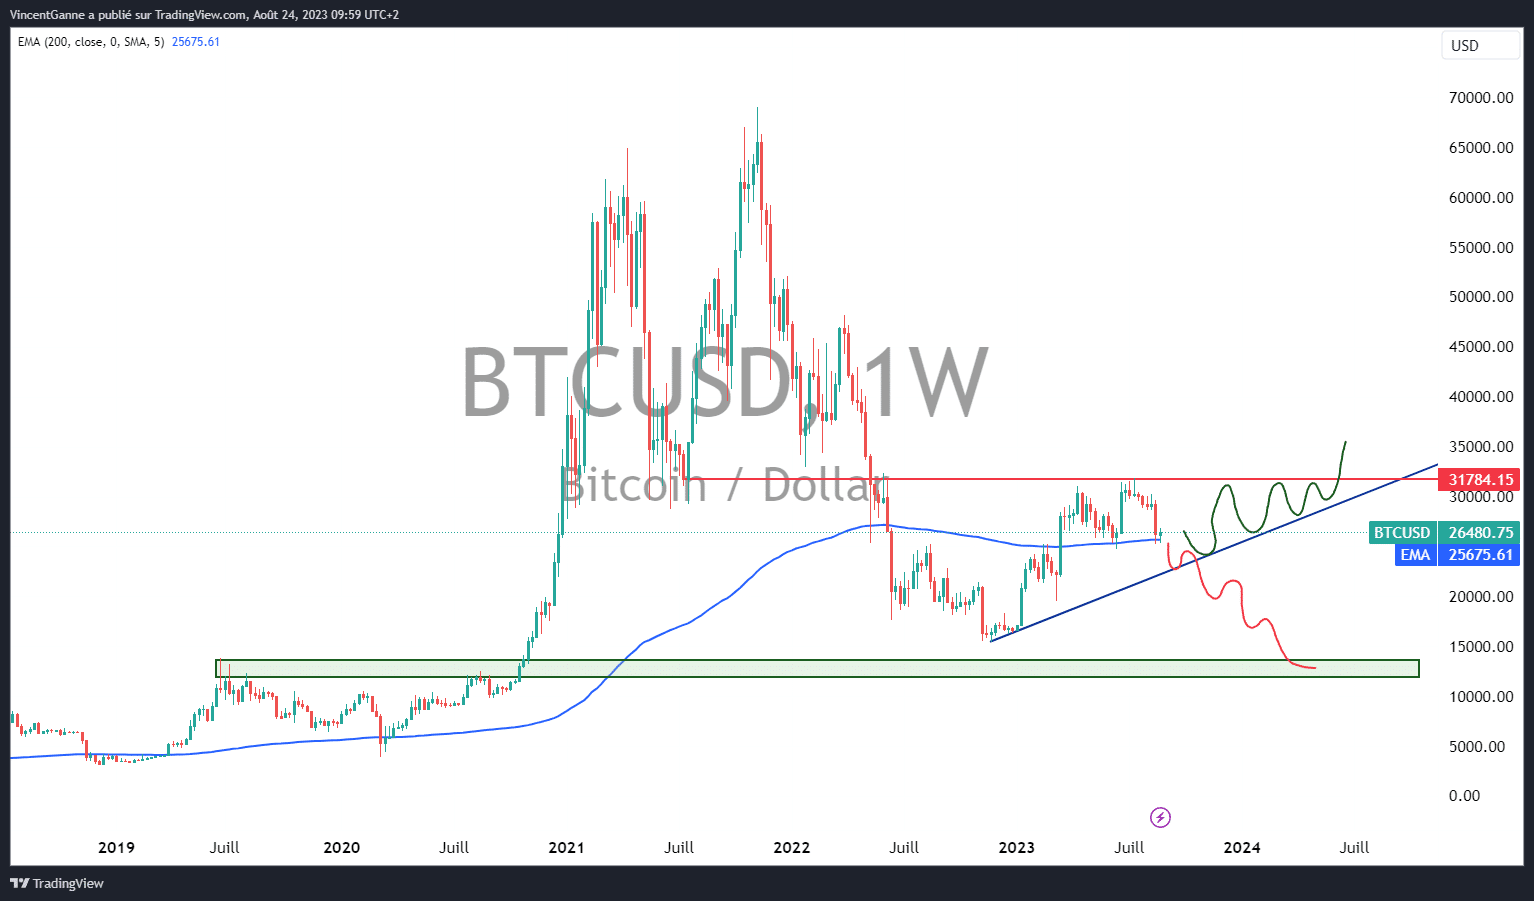 Chart showing weekly Japanese candlesticks with arithmetic scale for the bitcoin price (BTC/USD)